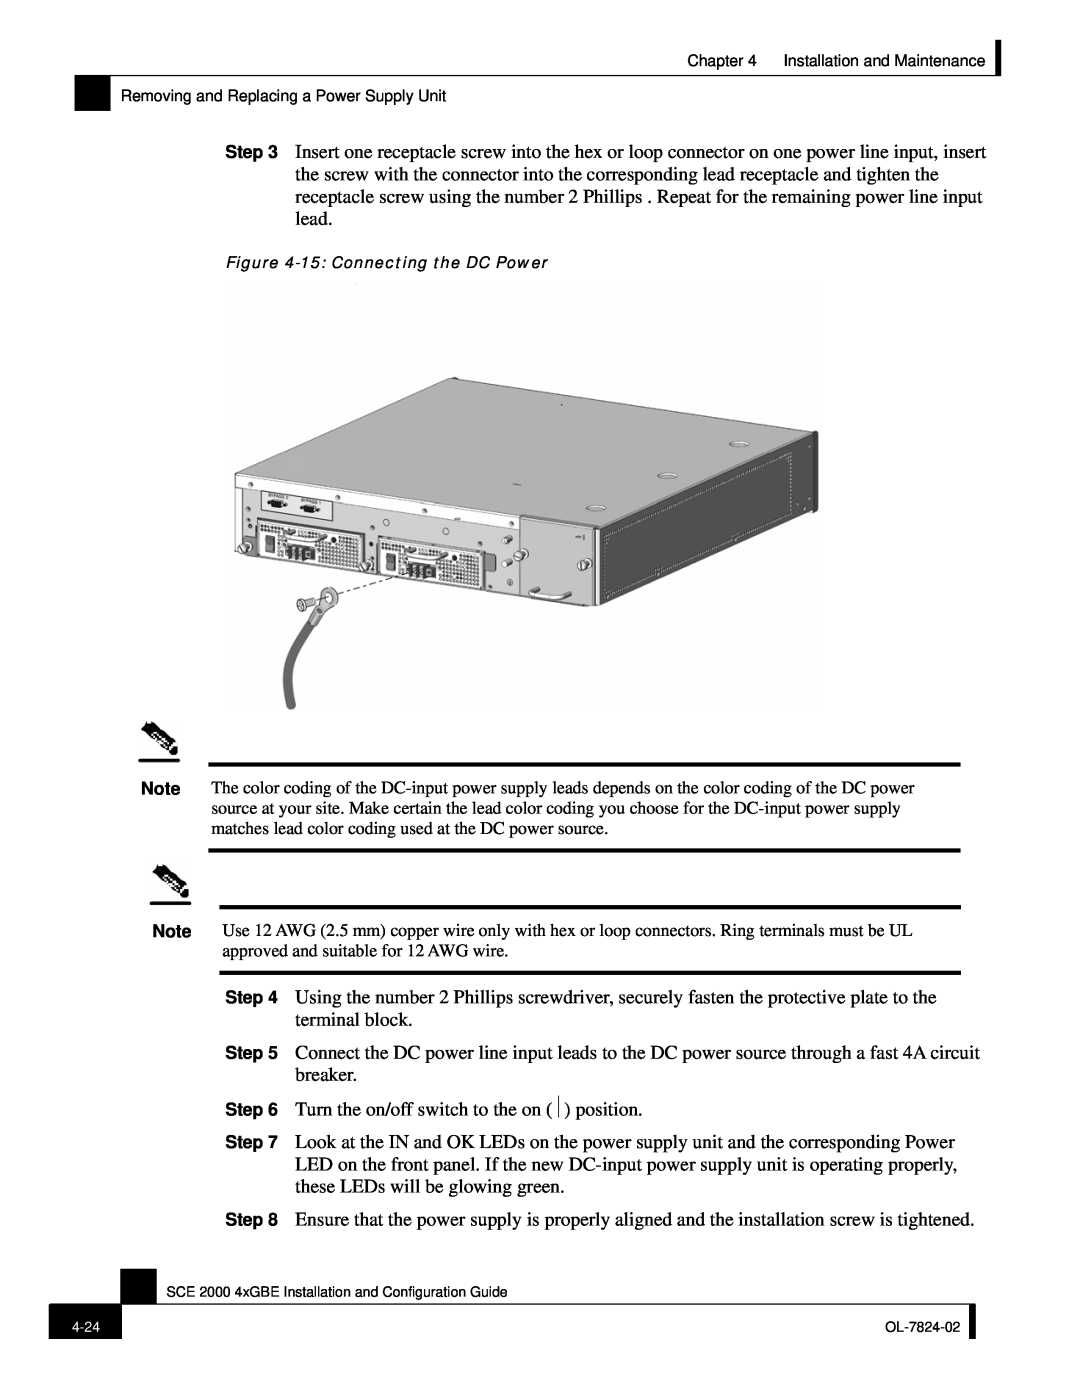 Cisco Systems SCE 2000 4xGBE manual Turn the on/off switch to the on position 